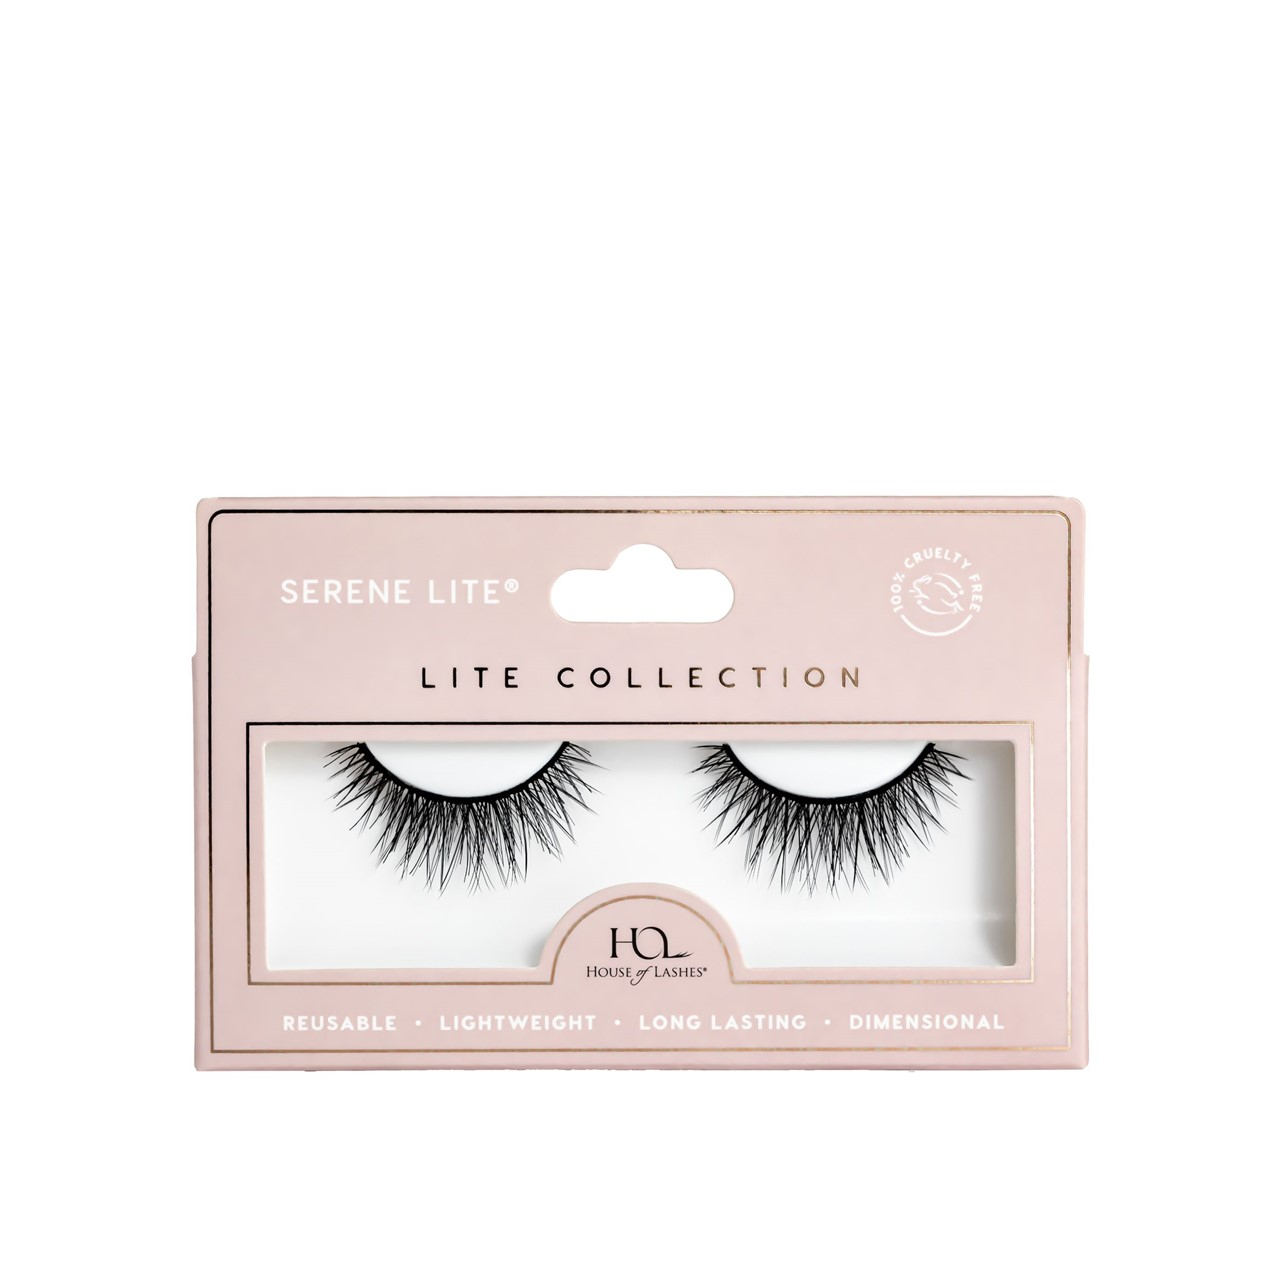 House of Lashes Lite Collection Serene Lite® False Lashes x1 Pair